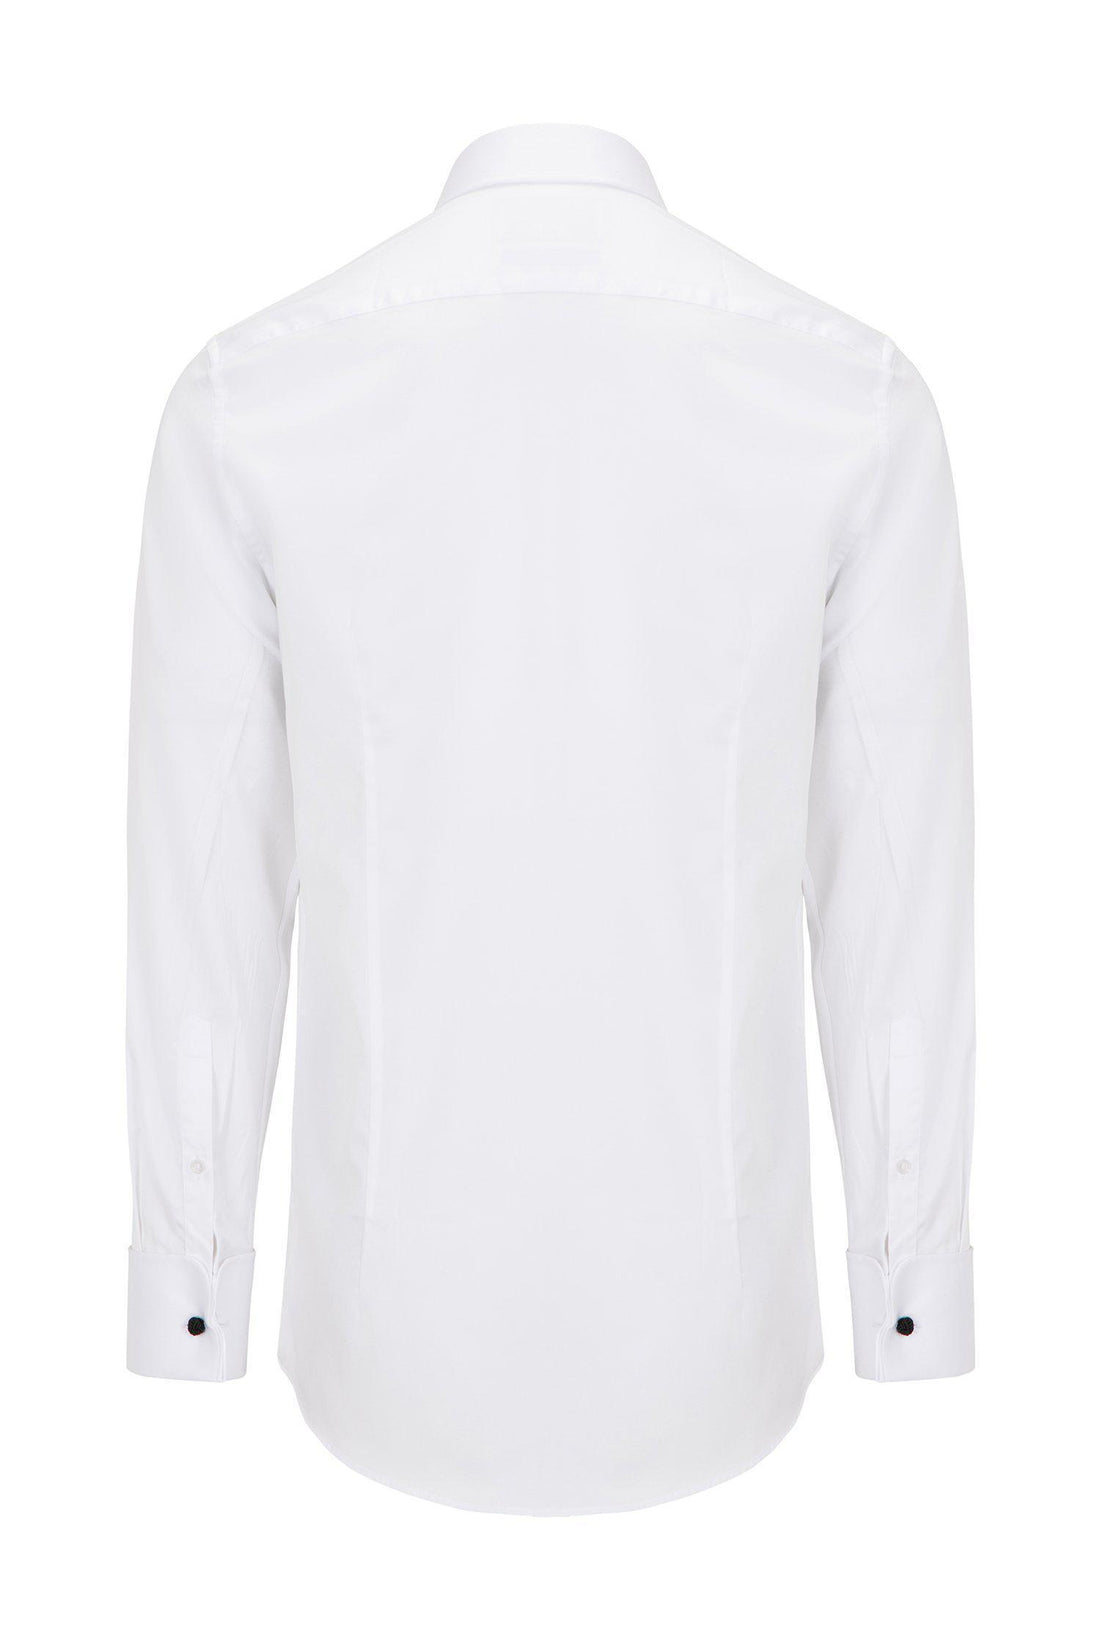 Classical Top 3 Front Stud Tuxedo Shirt - White - Ron Tomson